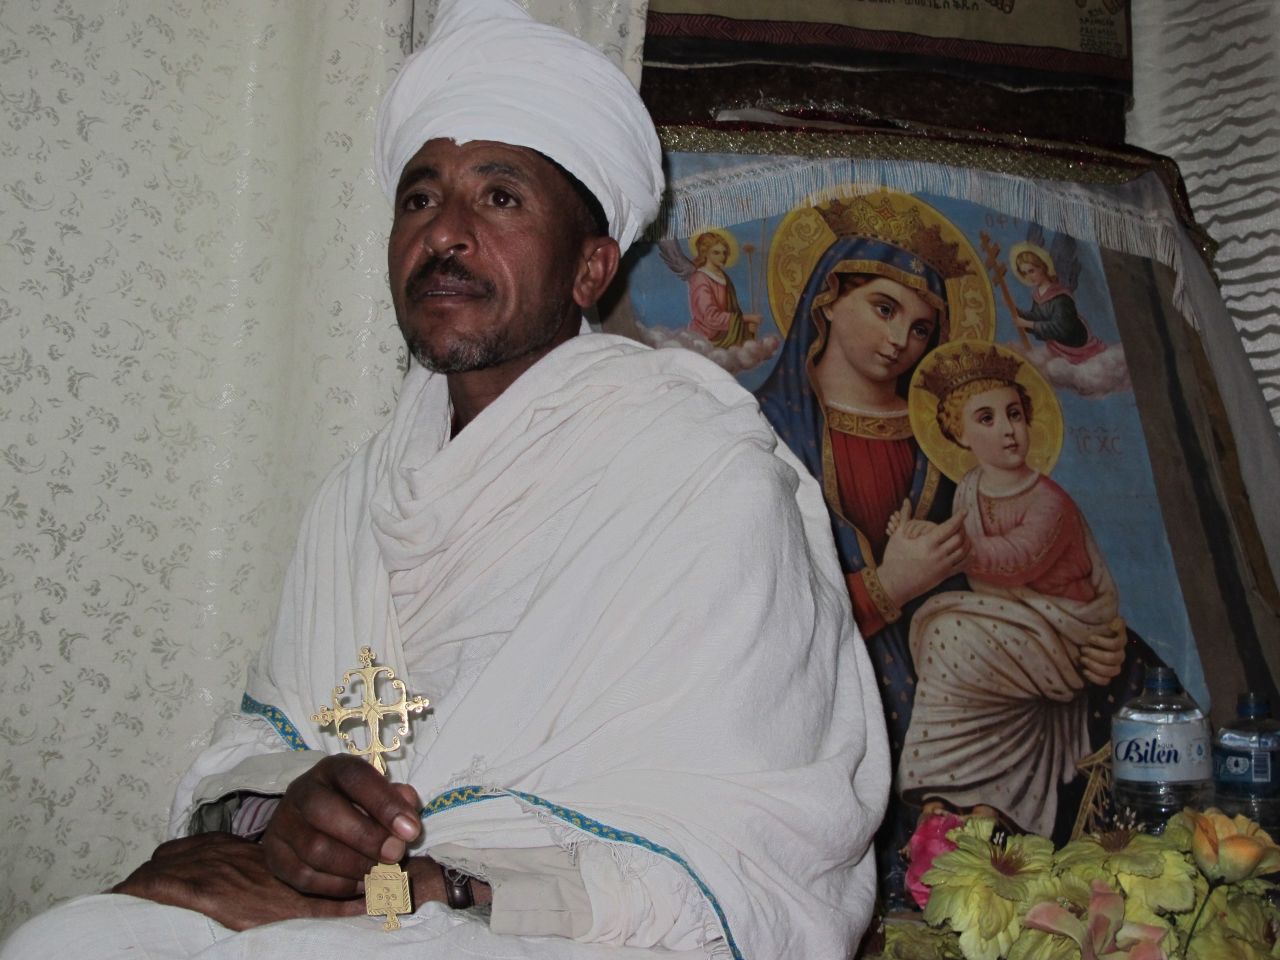 A local priest assigned to the House of Emmanuel, one of Lalibela's churches.